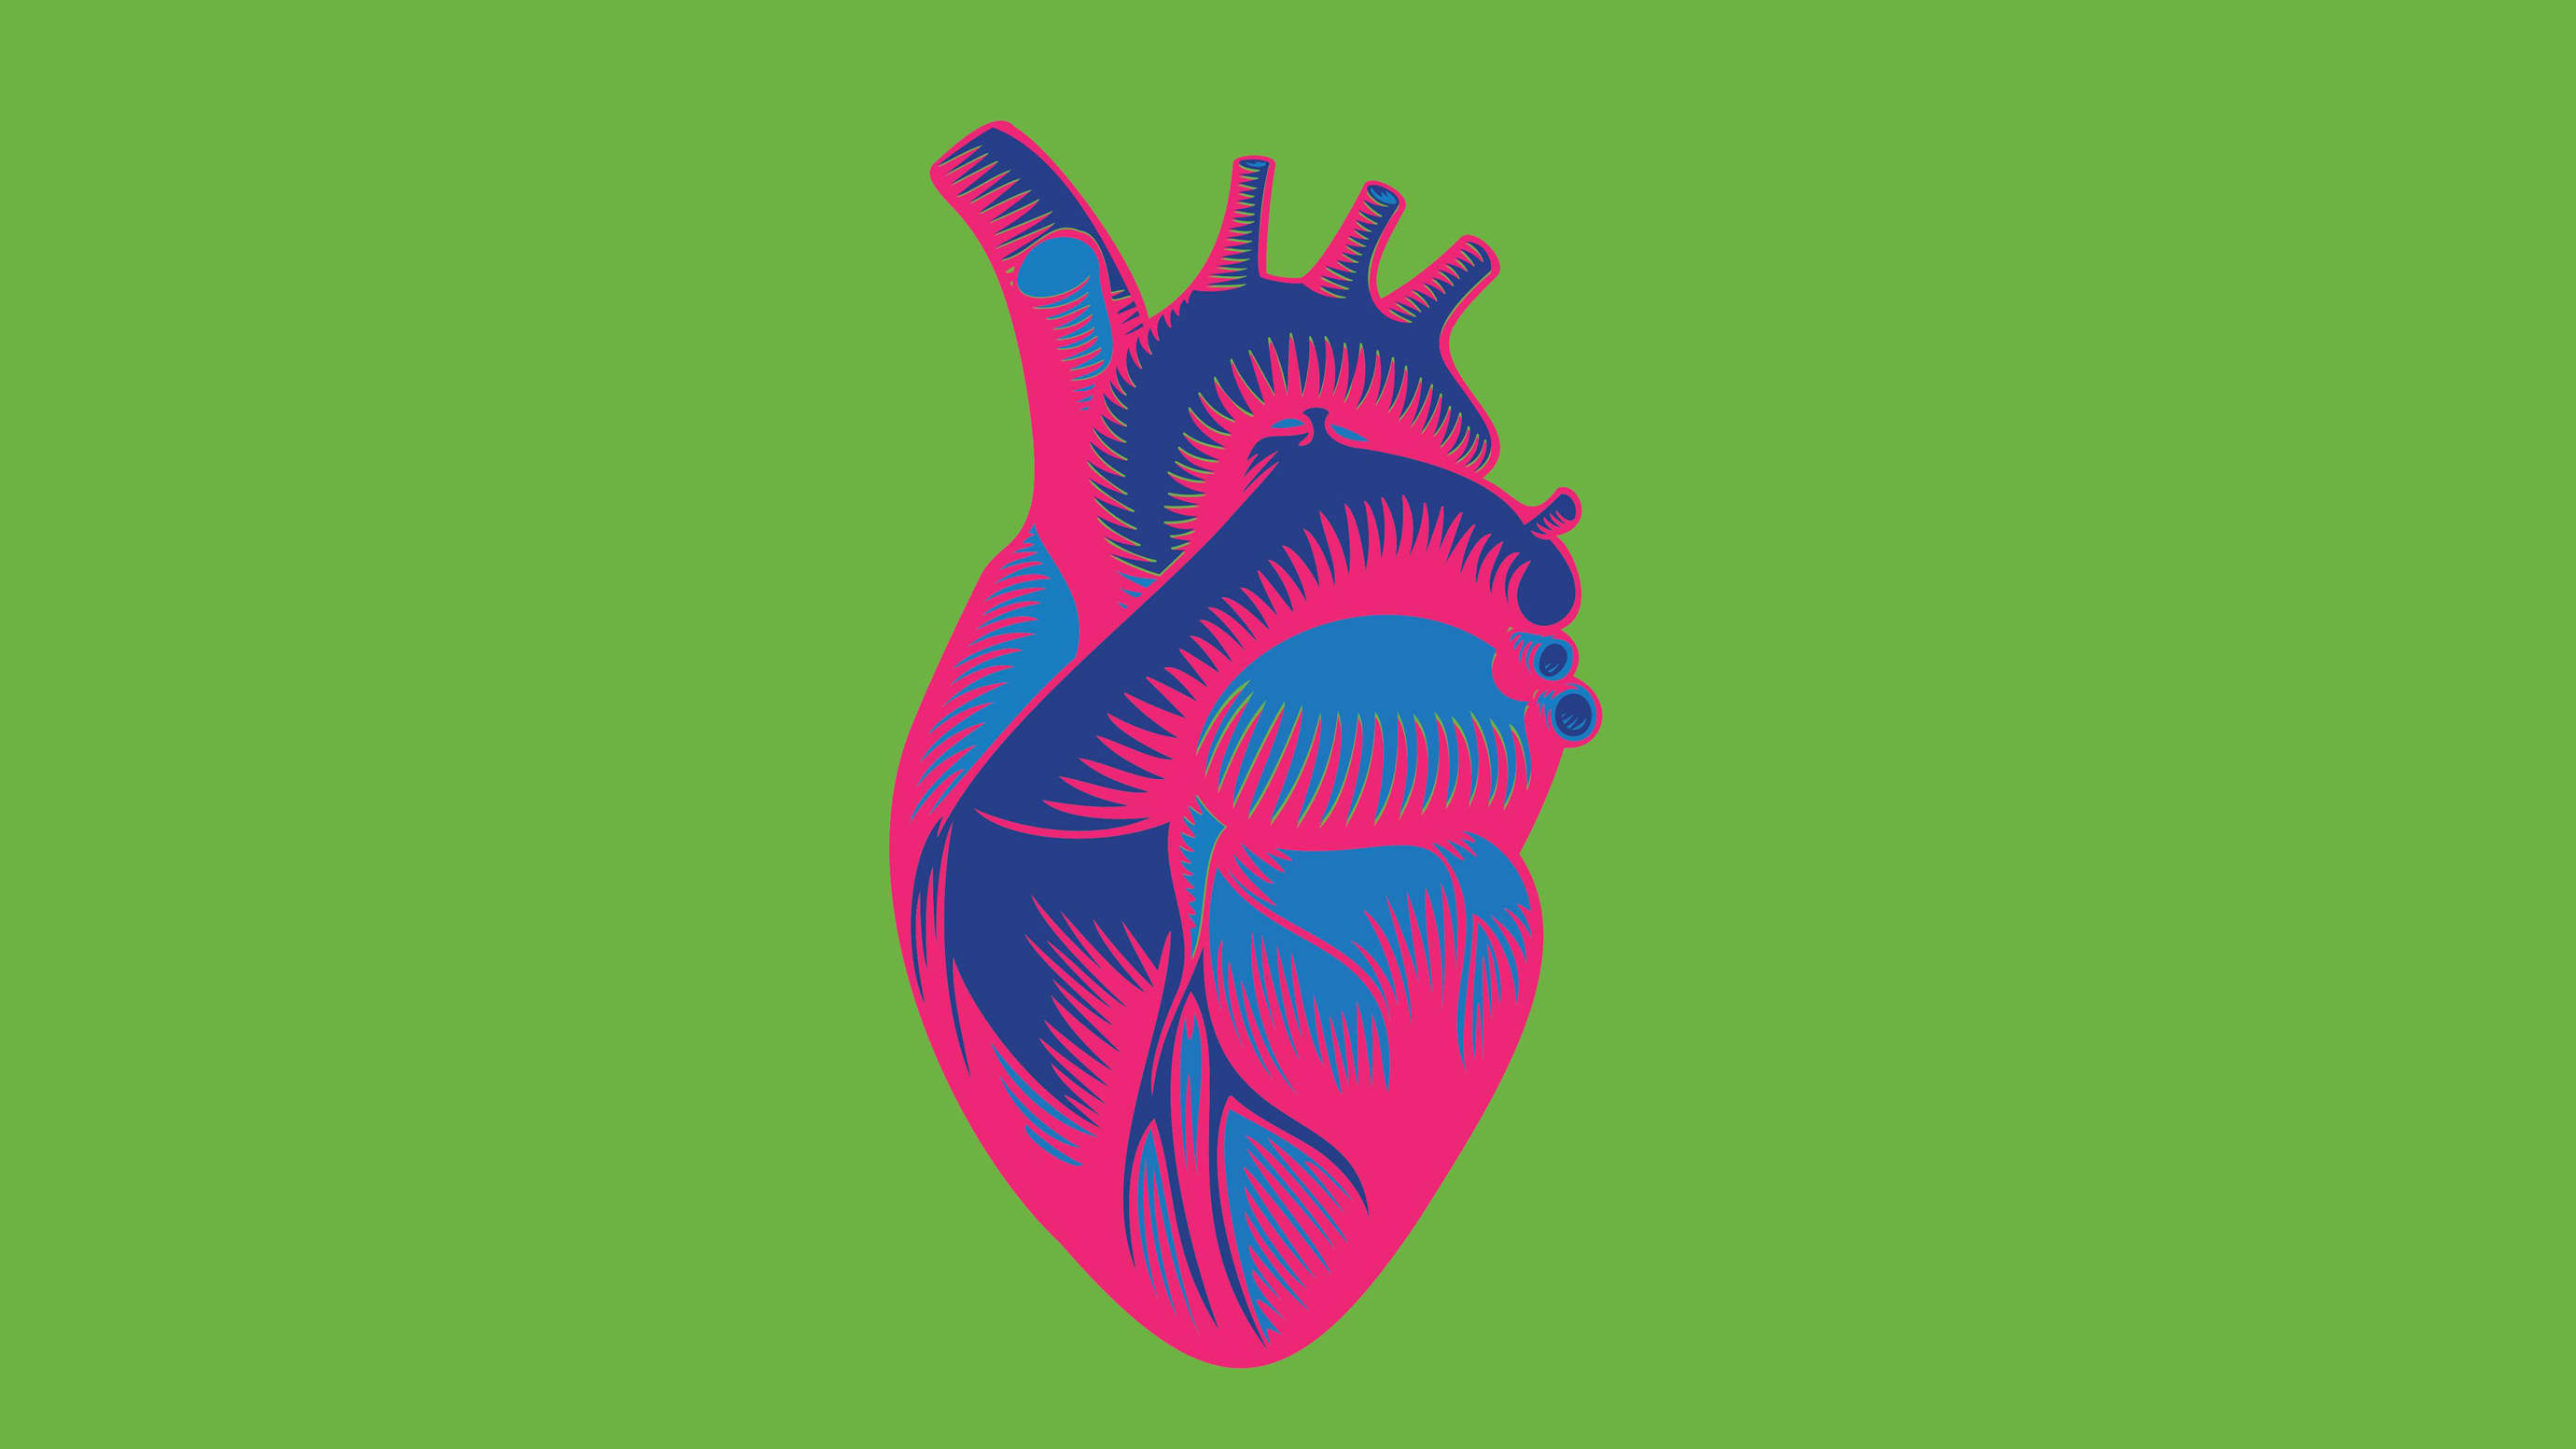 Anatomical illustration of a green and blue heart on a bright green background.